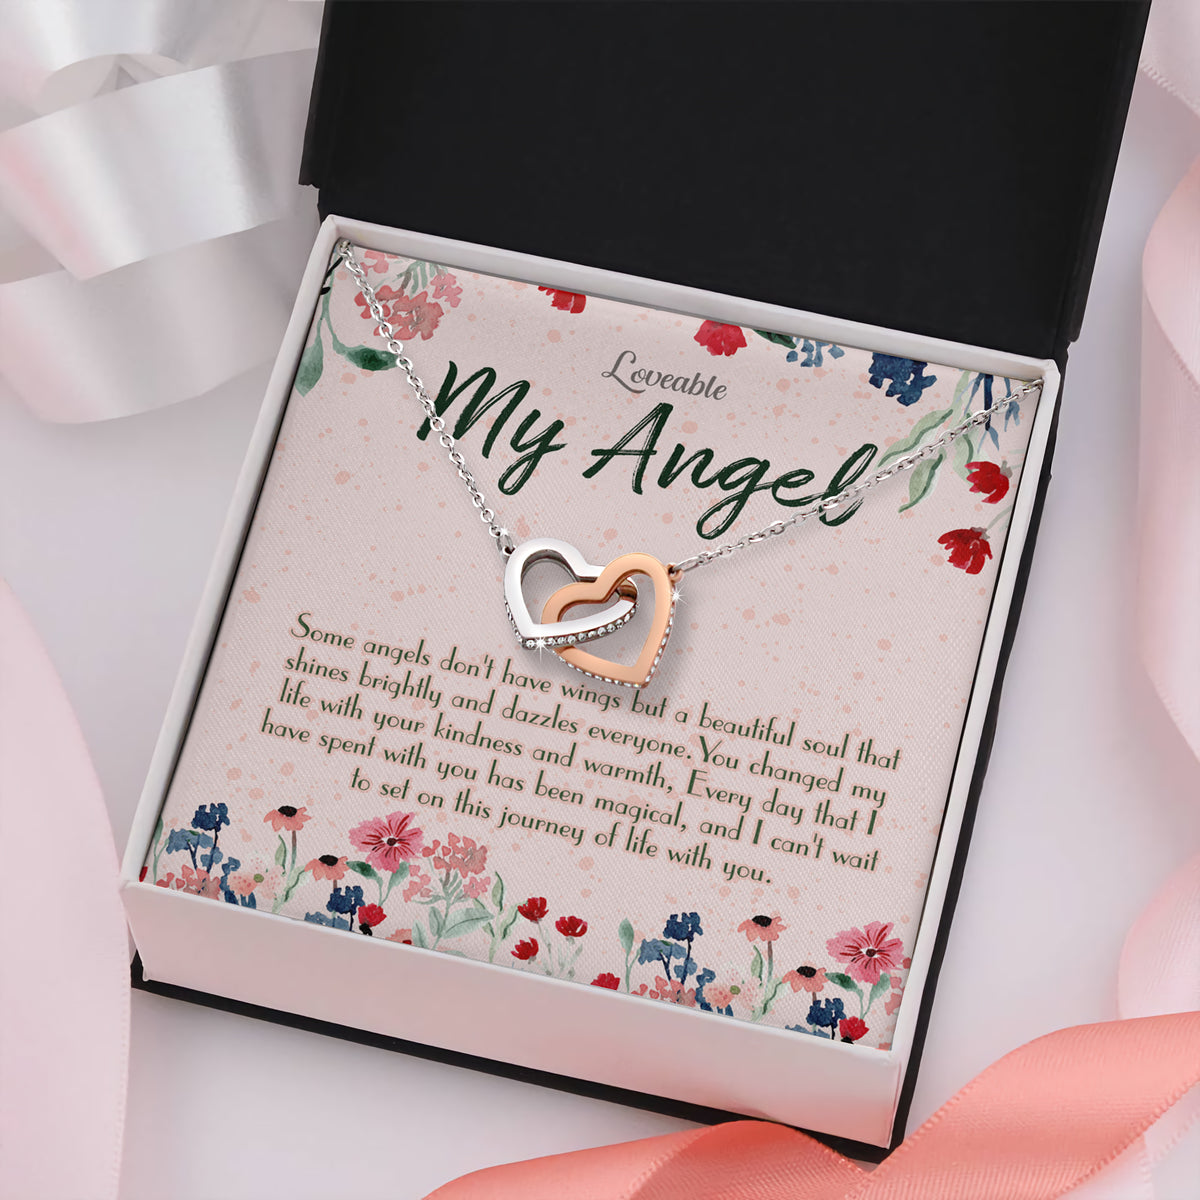 My Lovely Angel - Interlocking White Gold Necklace - Sorry Gift For Wife